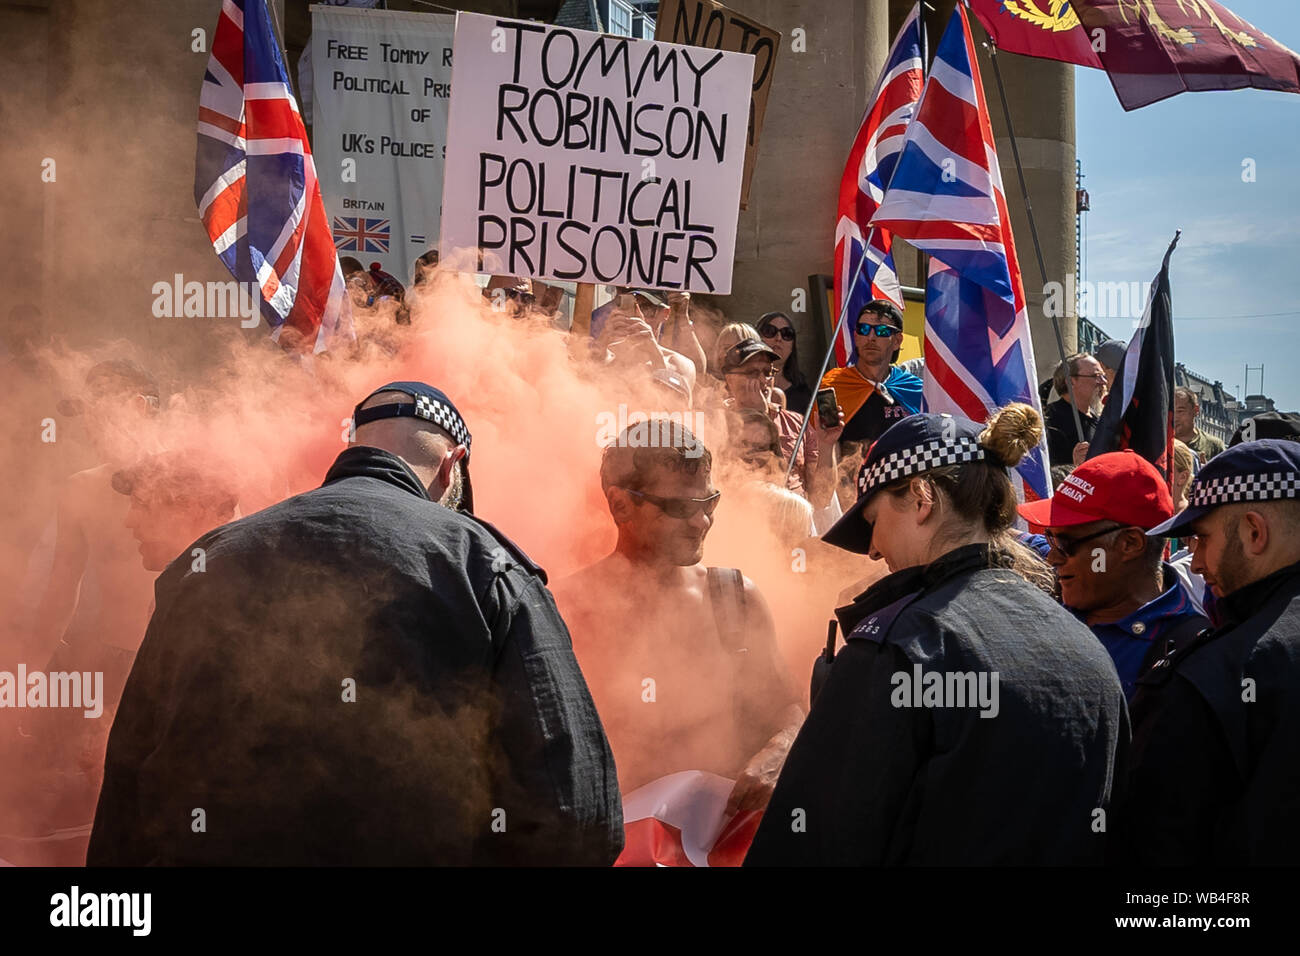 London, UK. 24th August, 2019. 'Free Tommy Robinson' protest outside BBC Broadcasting House. Police make over twenty arrests during a demonstration in support of the jailed Tommy Robinson, real name Stephen Yaxley-Lennon, who was sentenced last month to nine months in prison after being found guilty in contempt of court. Counter-protesters including antifascist activists and the anti-racist group: Stand Up to Racism, opposed the pro-Robinson demonstrators with protest groups kept apart by met police with some clashes. Credit: Guy Corbishley/Alamy Live News Stock Photo